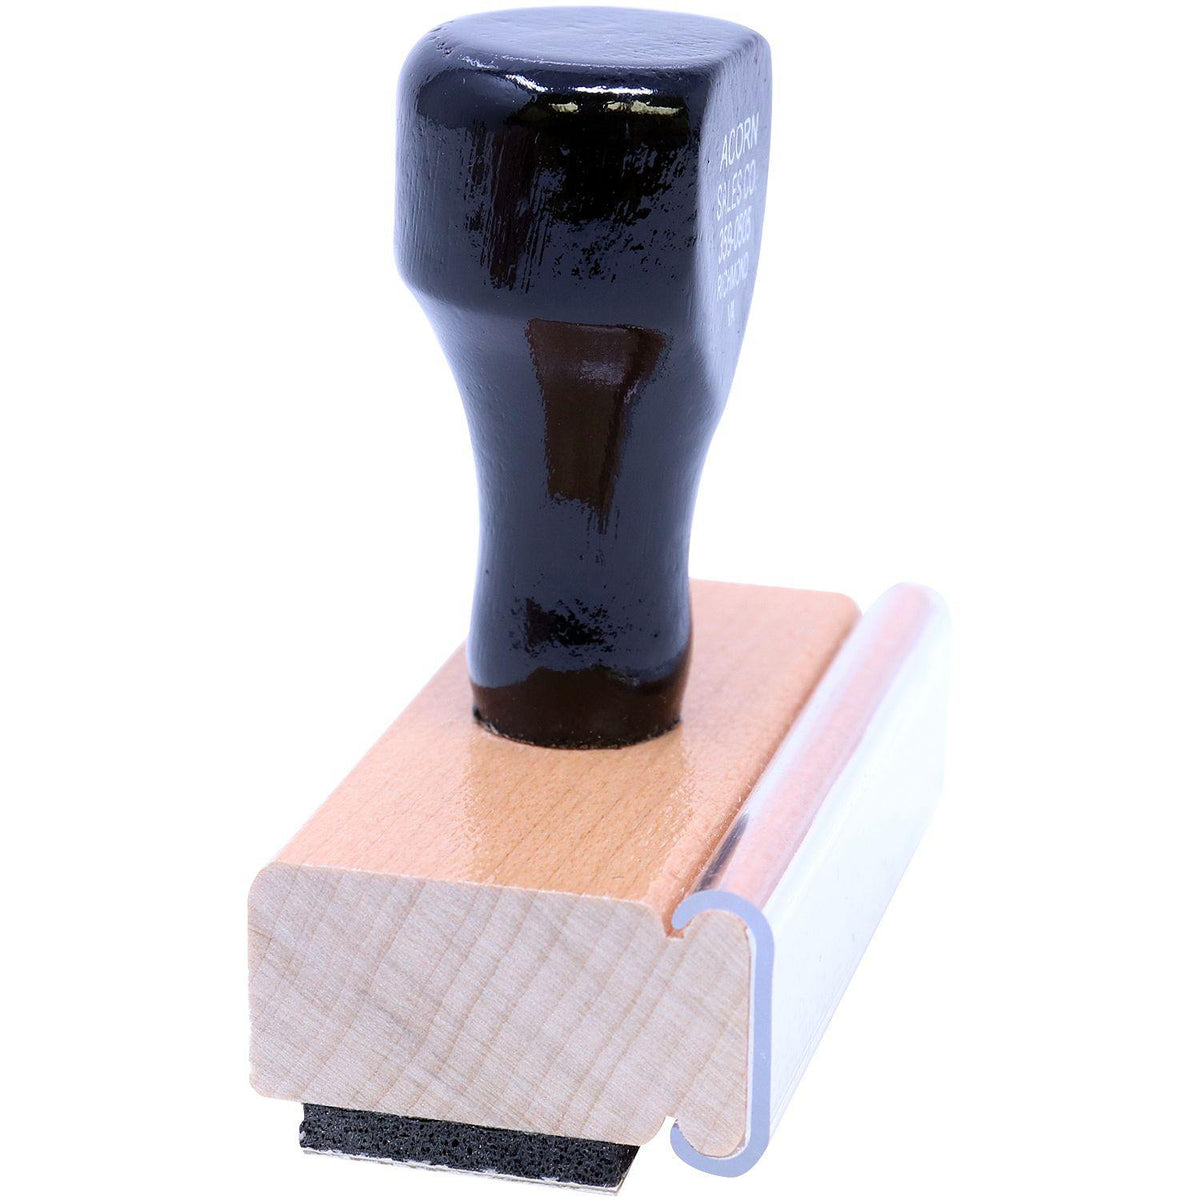 Side View of Large Plaintiff Rubber Stamp at an Angle